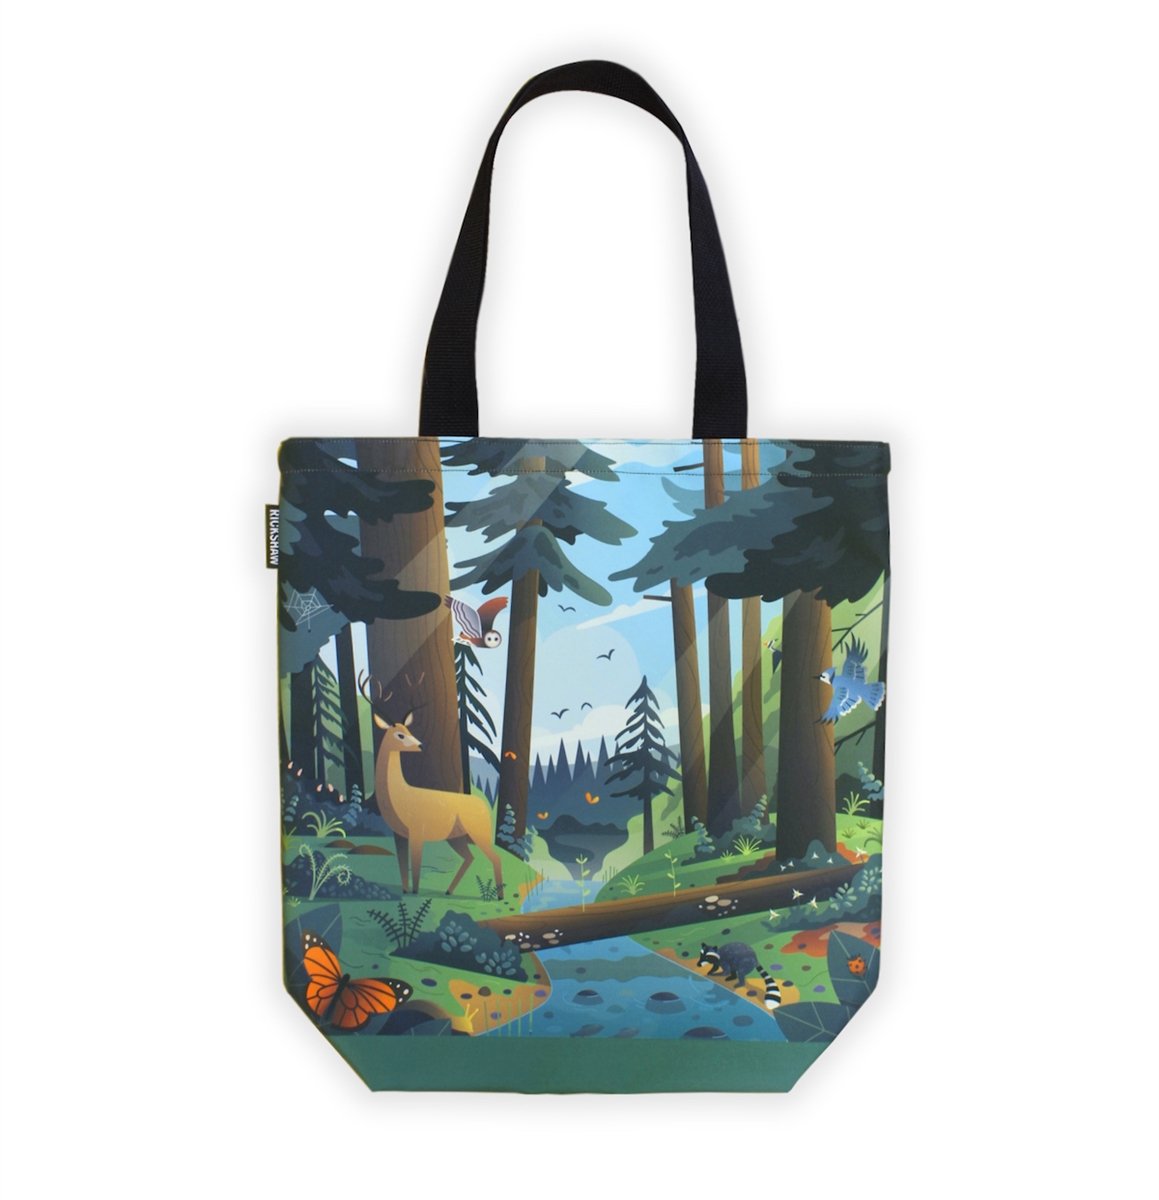 Tree Of Life SW2466 Tote Bag